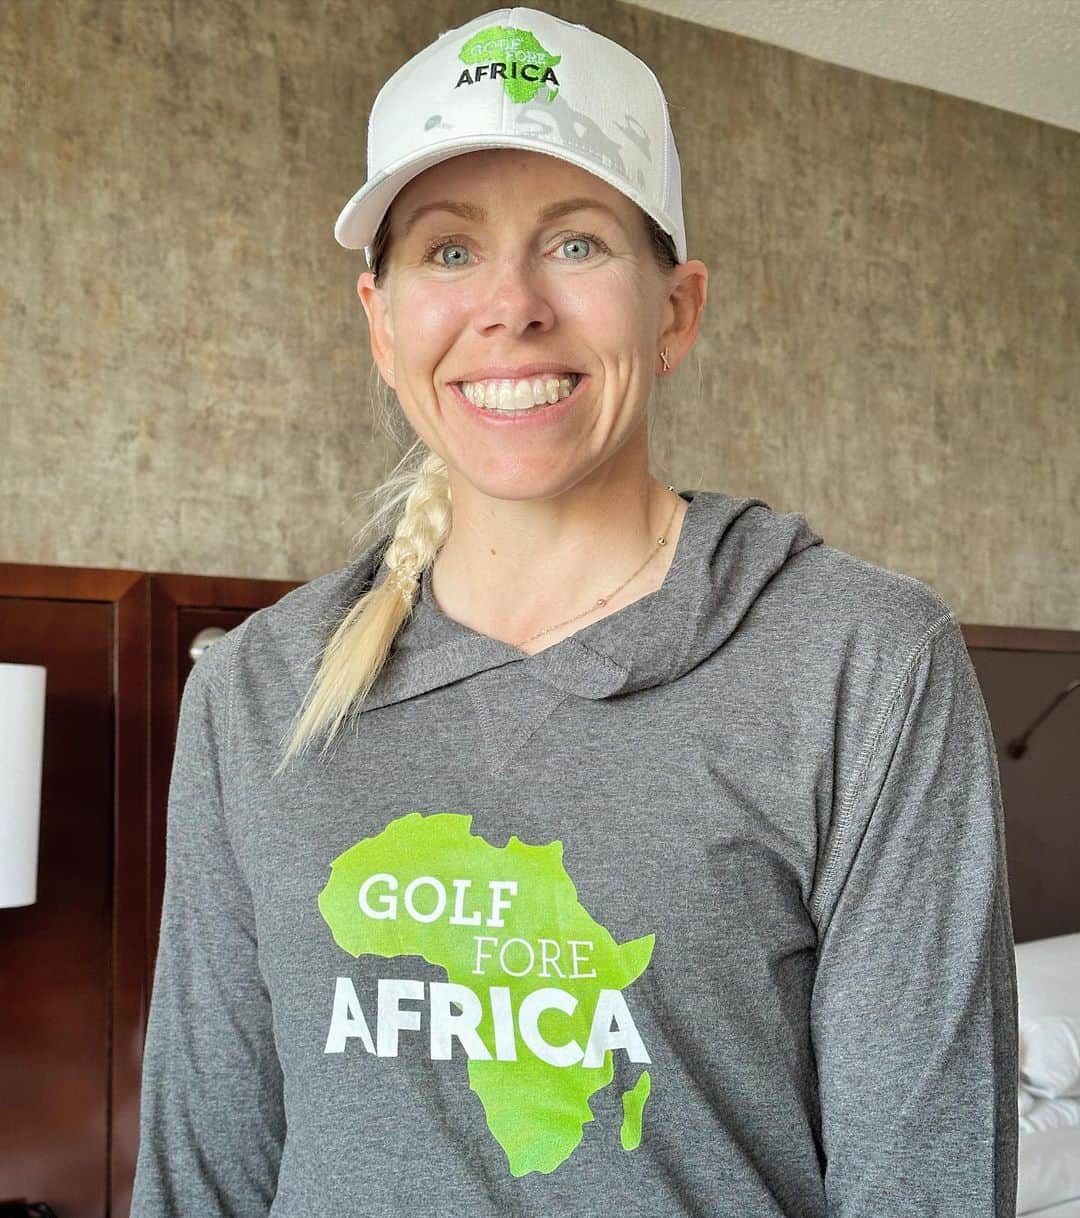 Pernilla Lindbergのインスタグラム：「This week I’m teaming up with 12 of my fellow LPGA Players and @golfforeafrica to raise money for a well and clean water in a village in Zambia. We take clean water for granted but to these villages, access to clean water comes life, health, better nutrition, education, and economic advancement.  Please consider joining me this week, as any donations up to $7,500 will be DOUBLED thanks for a generous donor. What is amazing to me is that only $50 can bring someone clean water for life! The link with more information is in my bio. A contribution of any amount will be entered in a drawing to win some Golf Fore Africa items!」